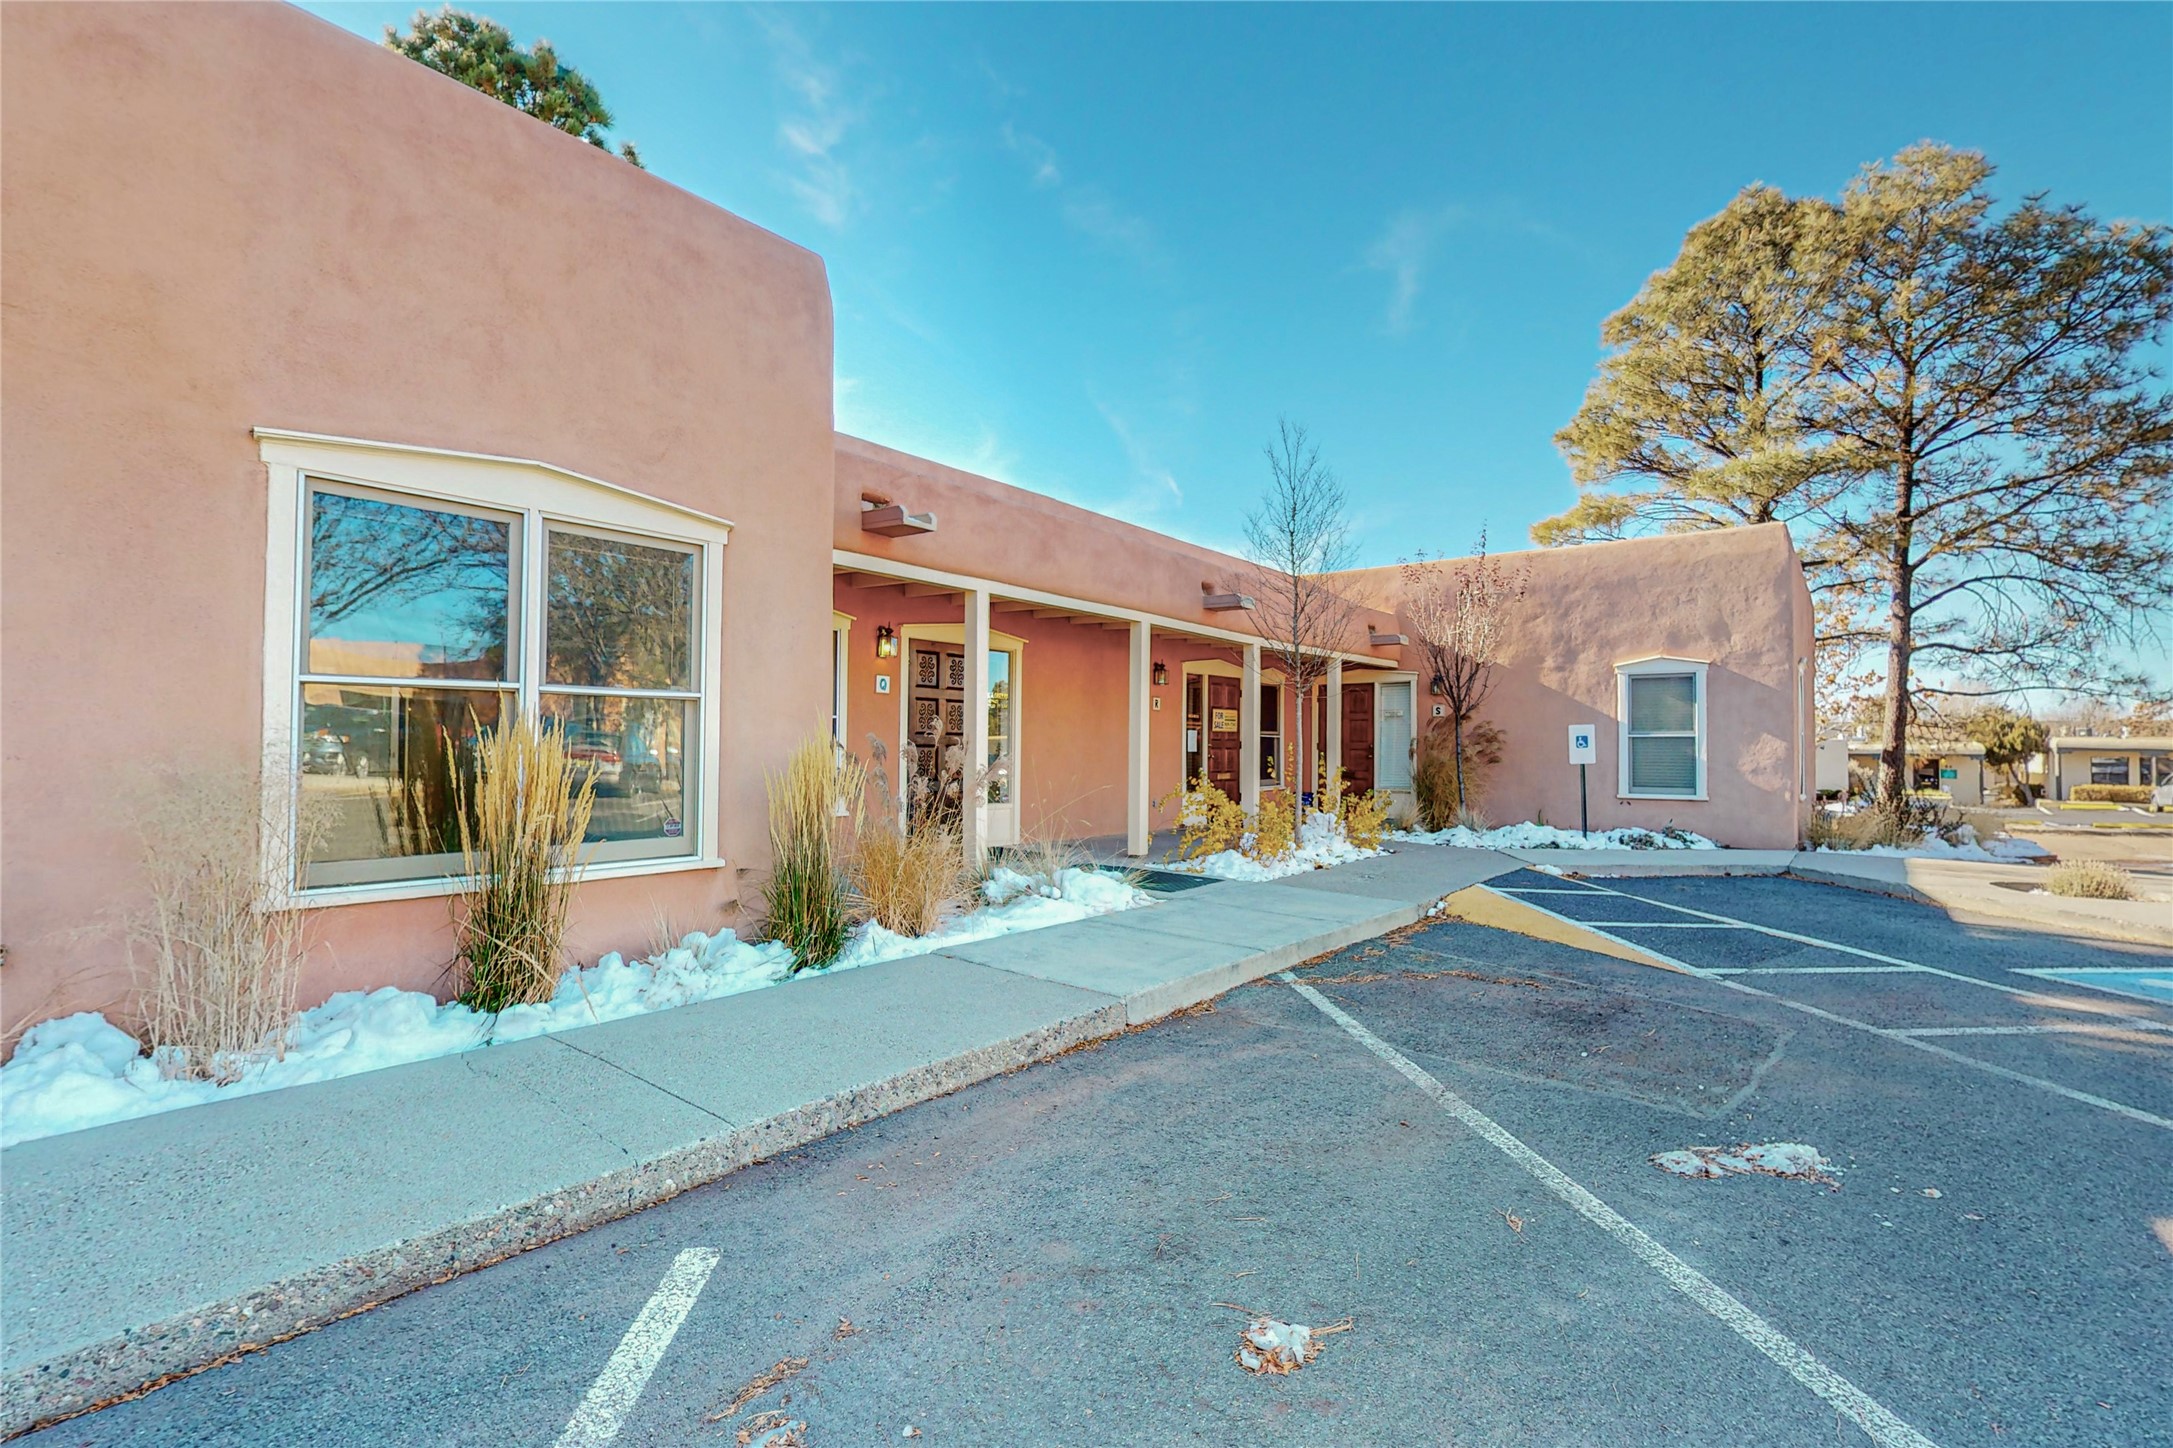 1421 Luisa Street Q, Santa Fe, New Mexico 87505, ,Commercial Lease,For Rent,1421 Luisa Street Q,202341915